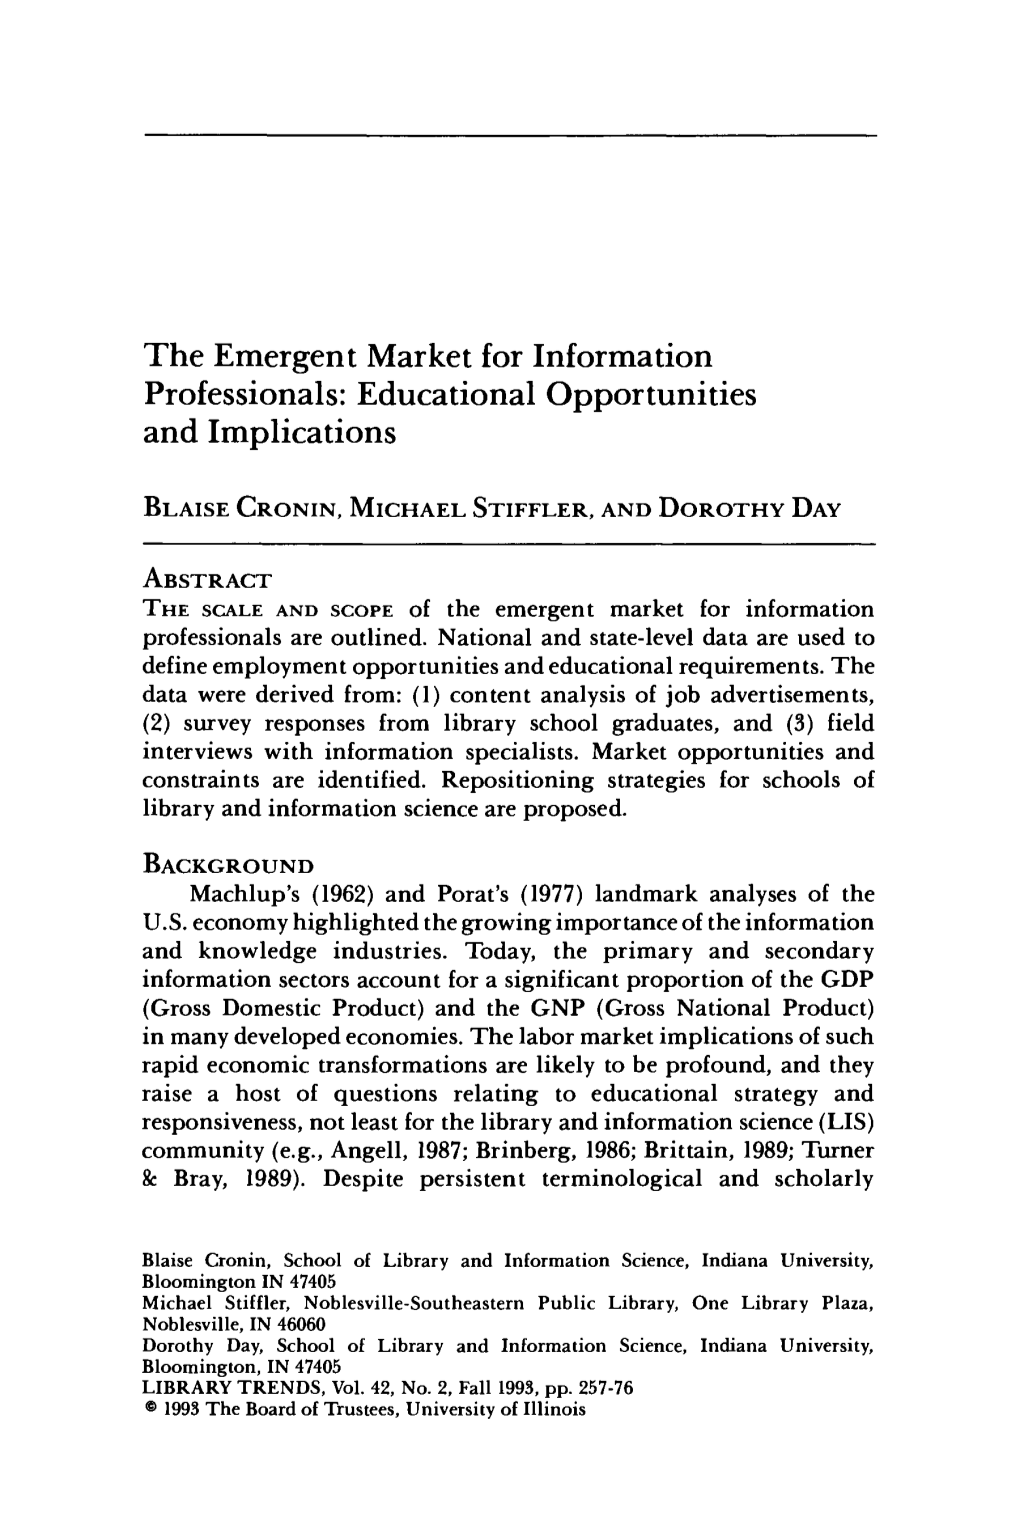 The Emergent Market for Information Professionals: Educational Opportunities and Implications